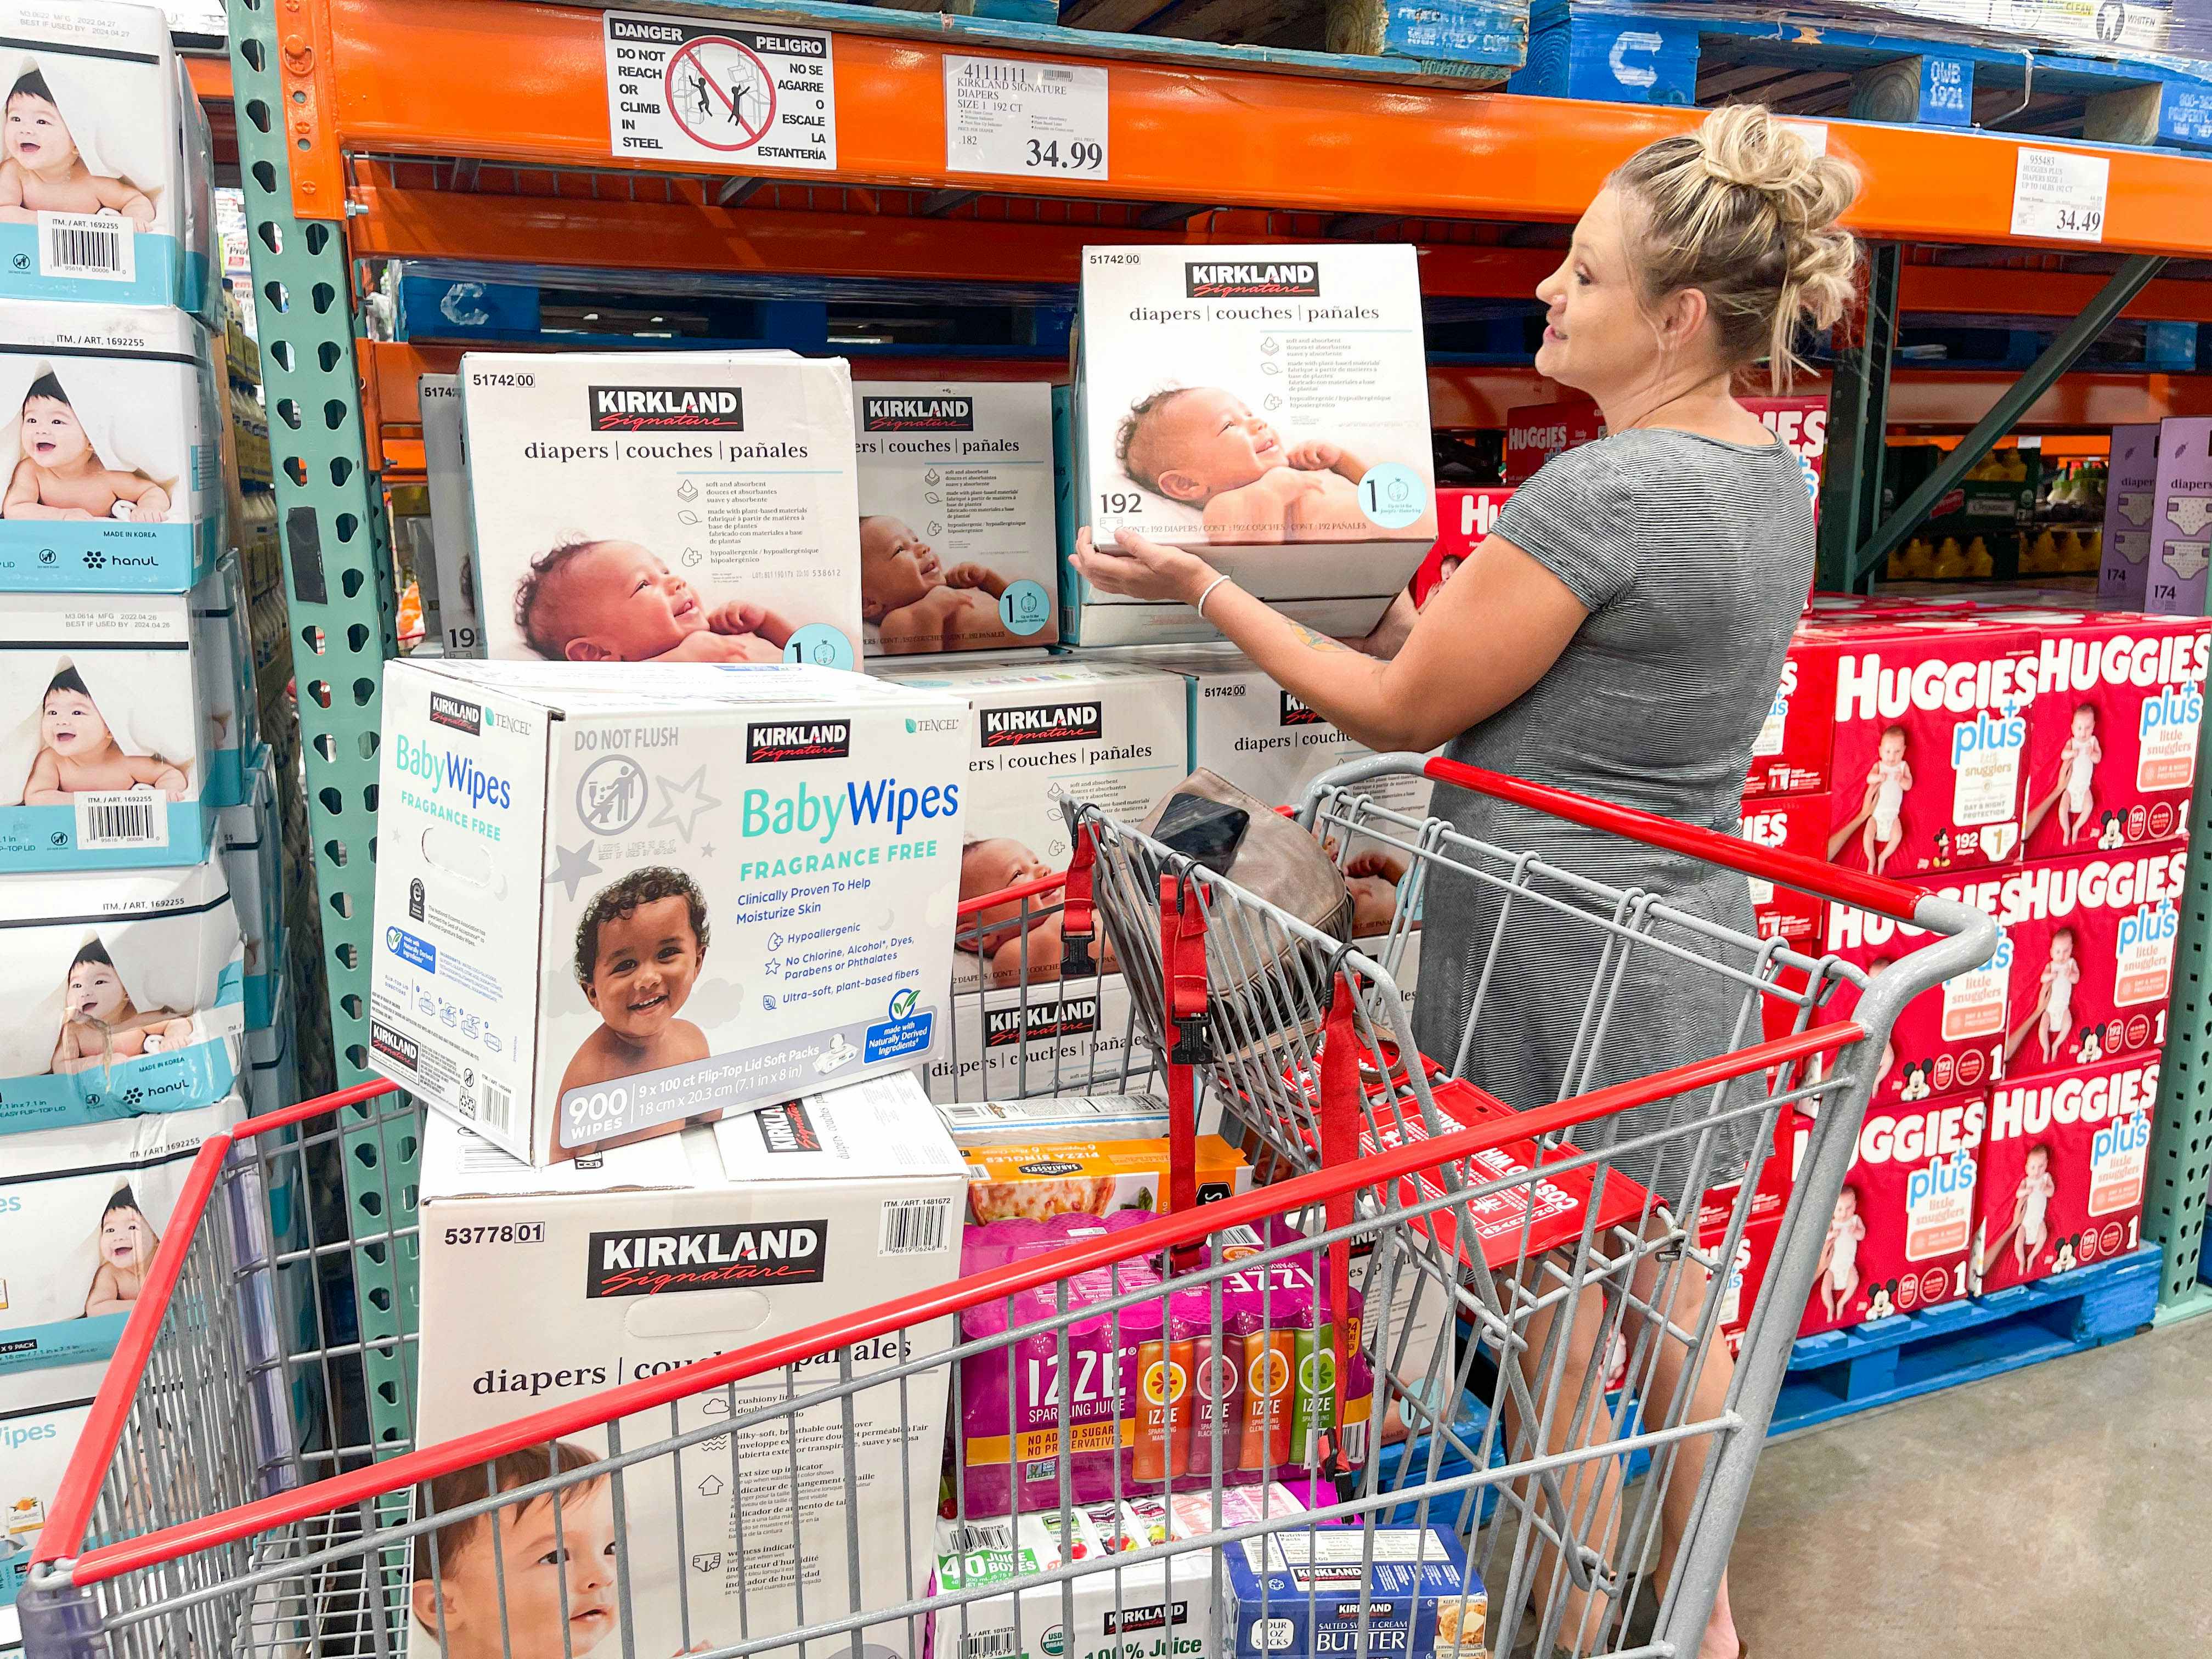 a woman looking at kirkland diapers and filling up cart